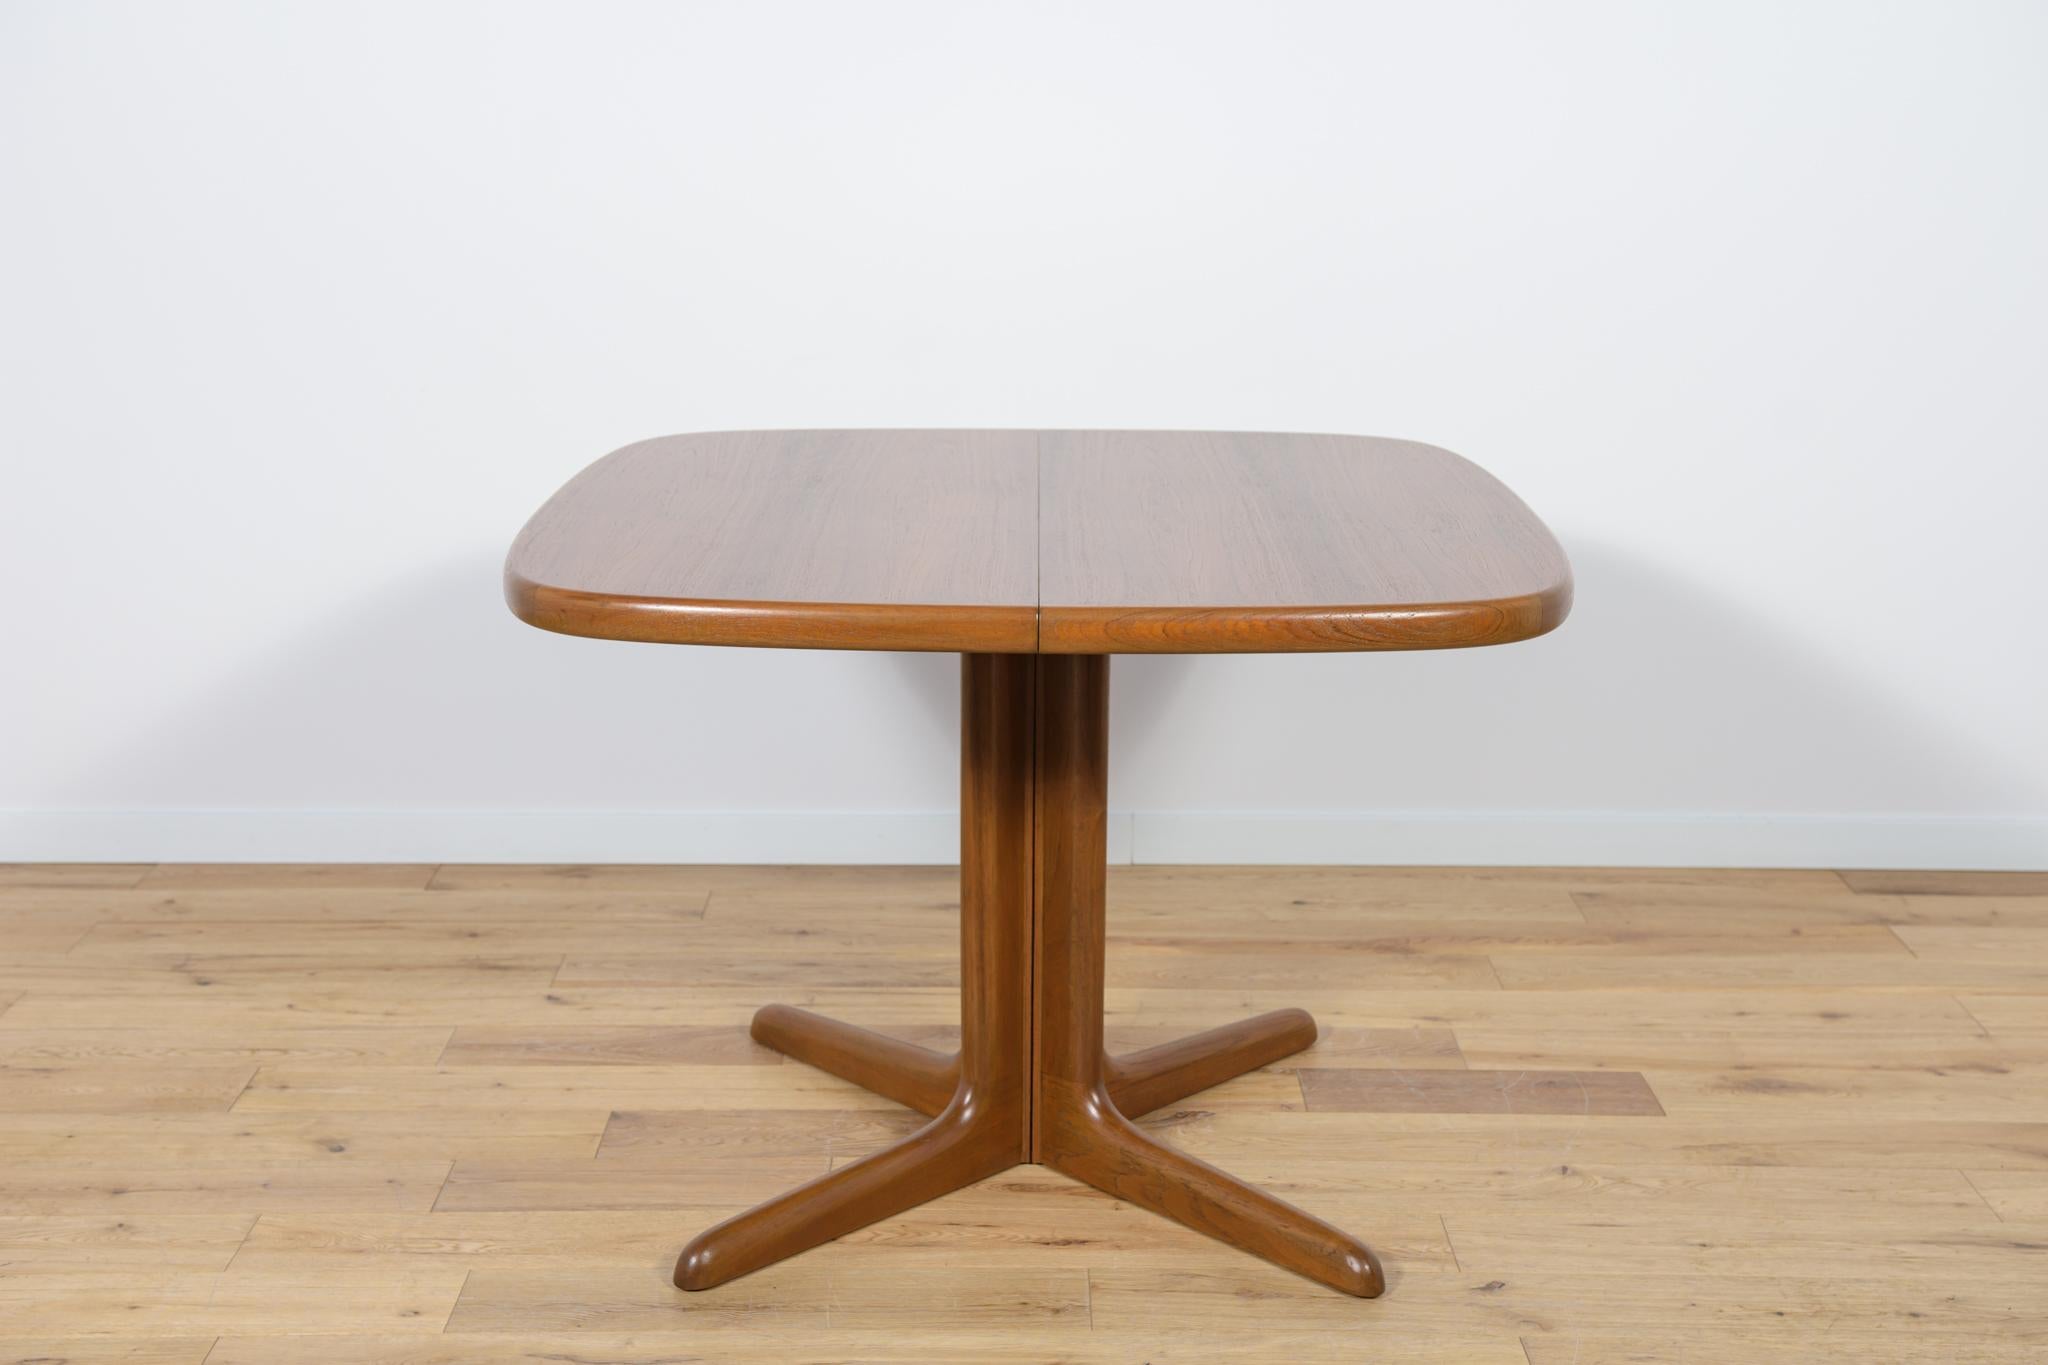 This teak dining table was Danish manufactured by Skovby Mobelfabrik in the 1960s. The table has profiled edges, giving it elegance and a unique character. The furniture has been thoroughly renovated, cleaned of old coating, painted with oak stain,